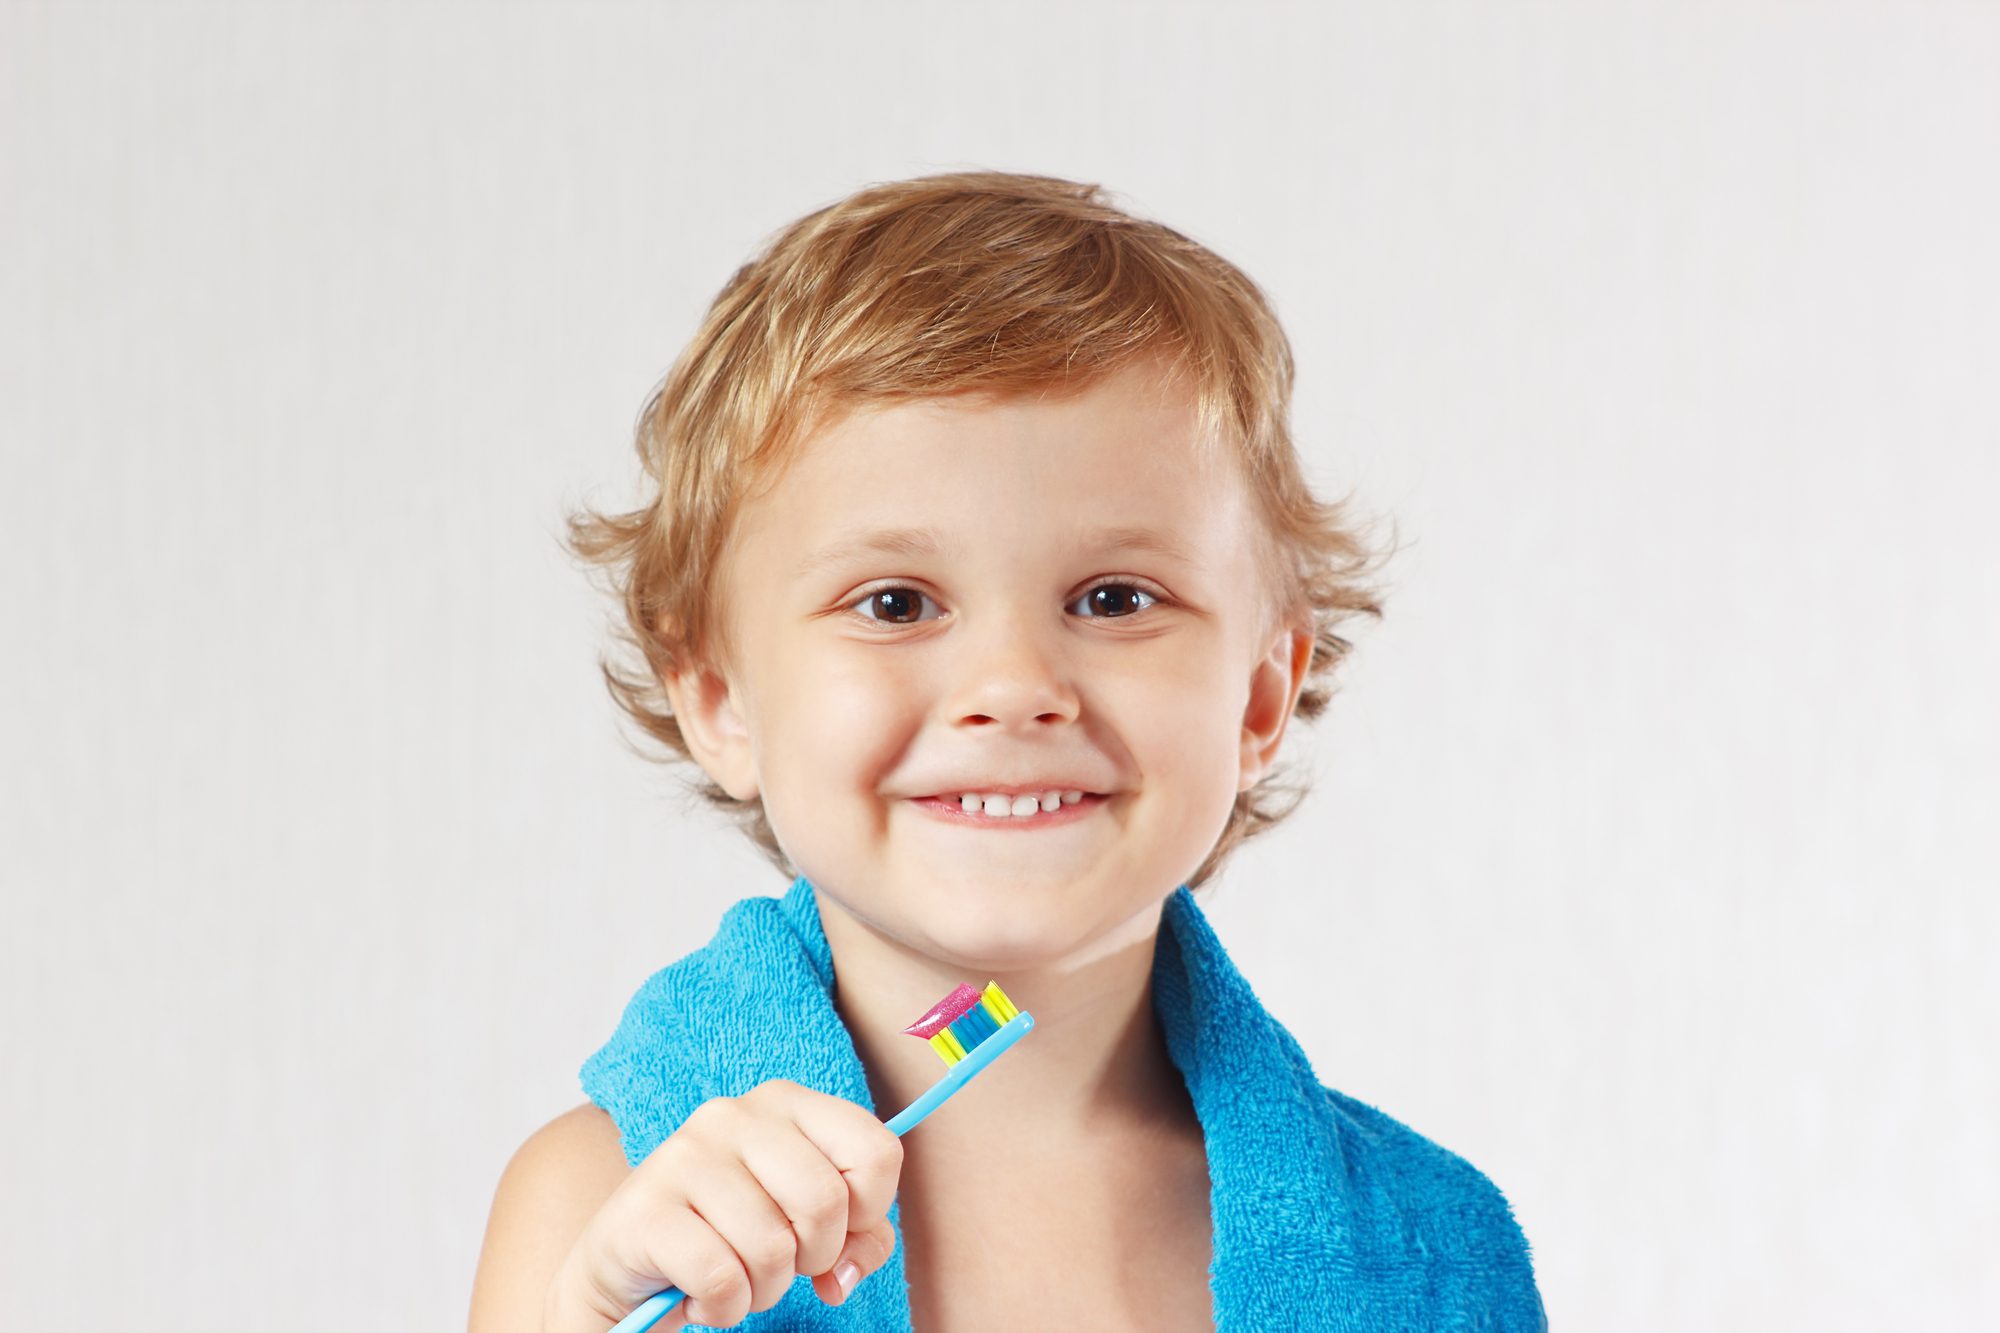 Want to know what to expect at your child’s first visit to the dentist? Read this!